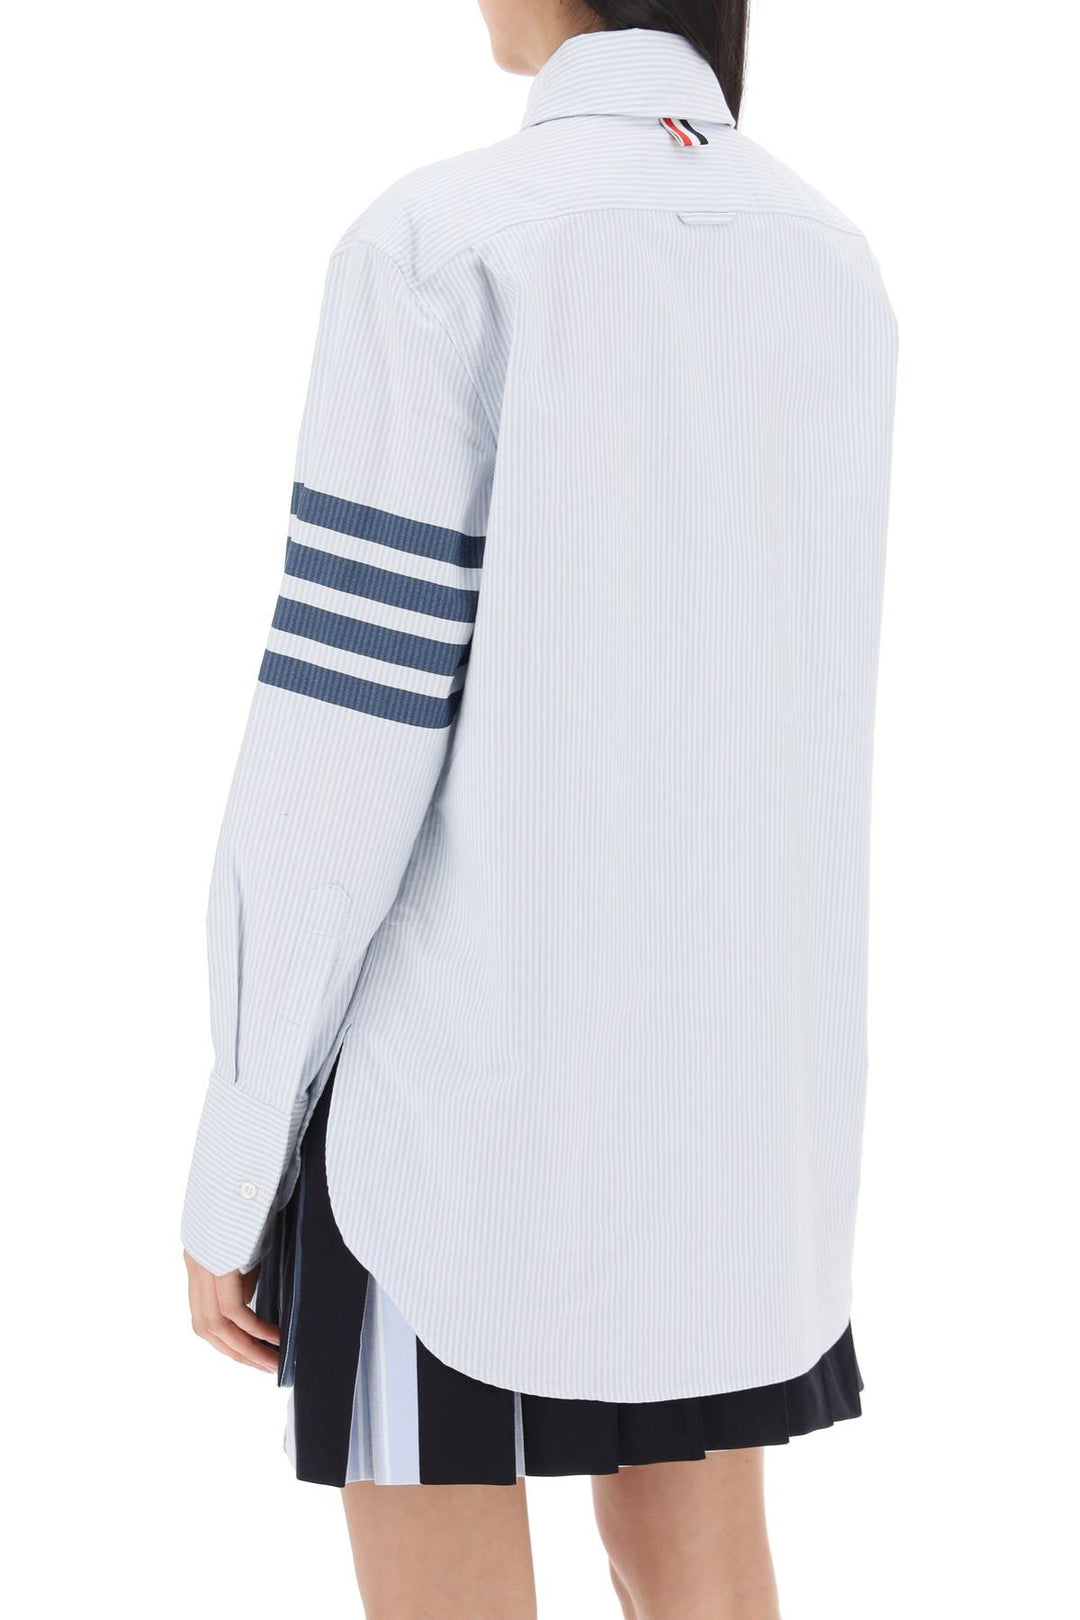 Thom Browne Striped Oxford Shirt With Pointed Collar   Bianco